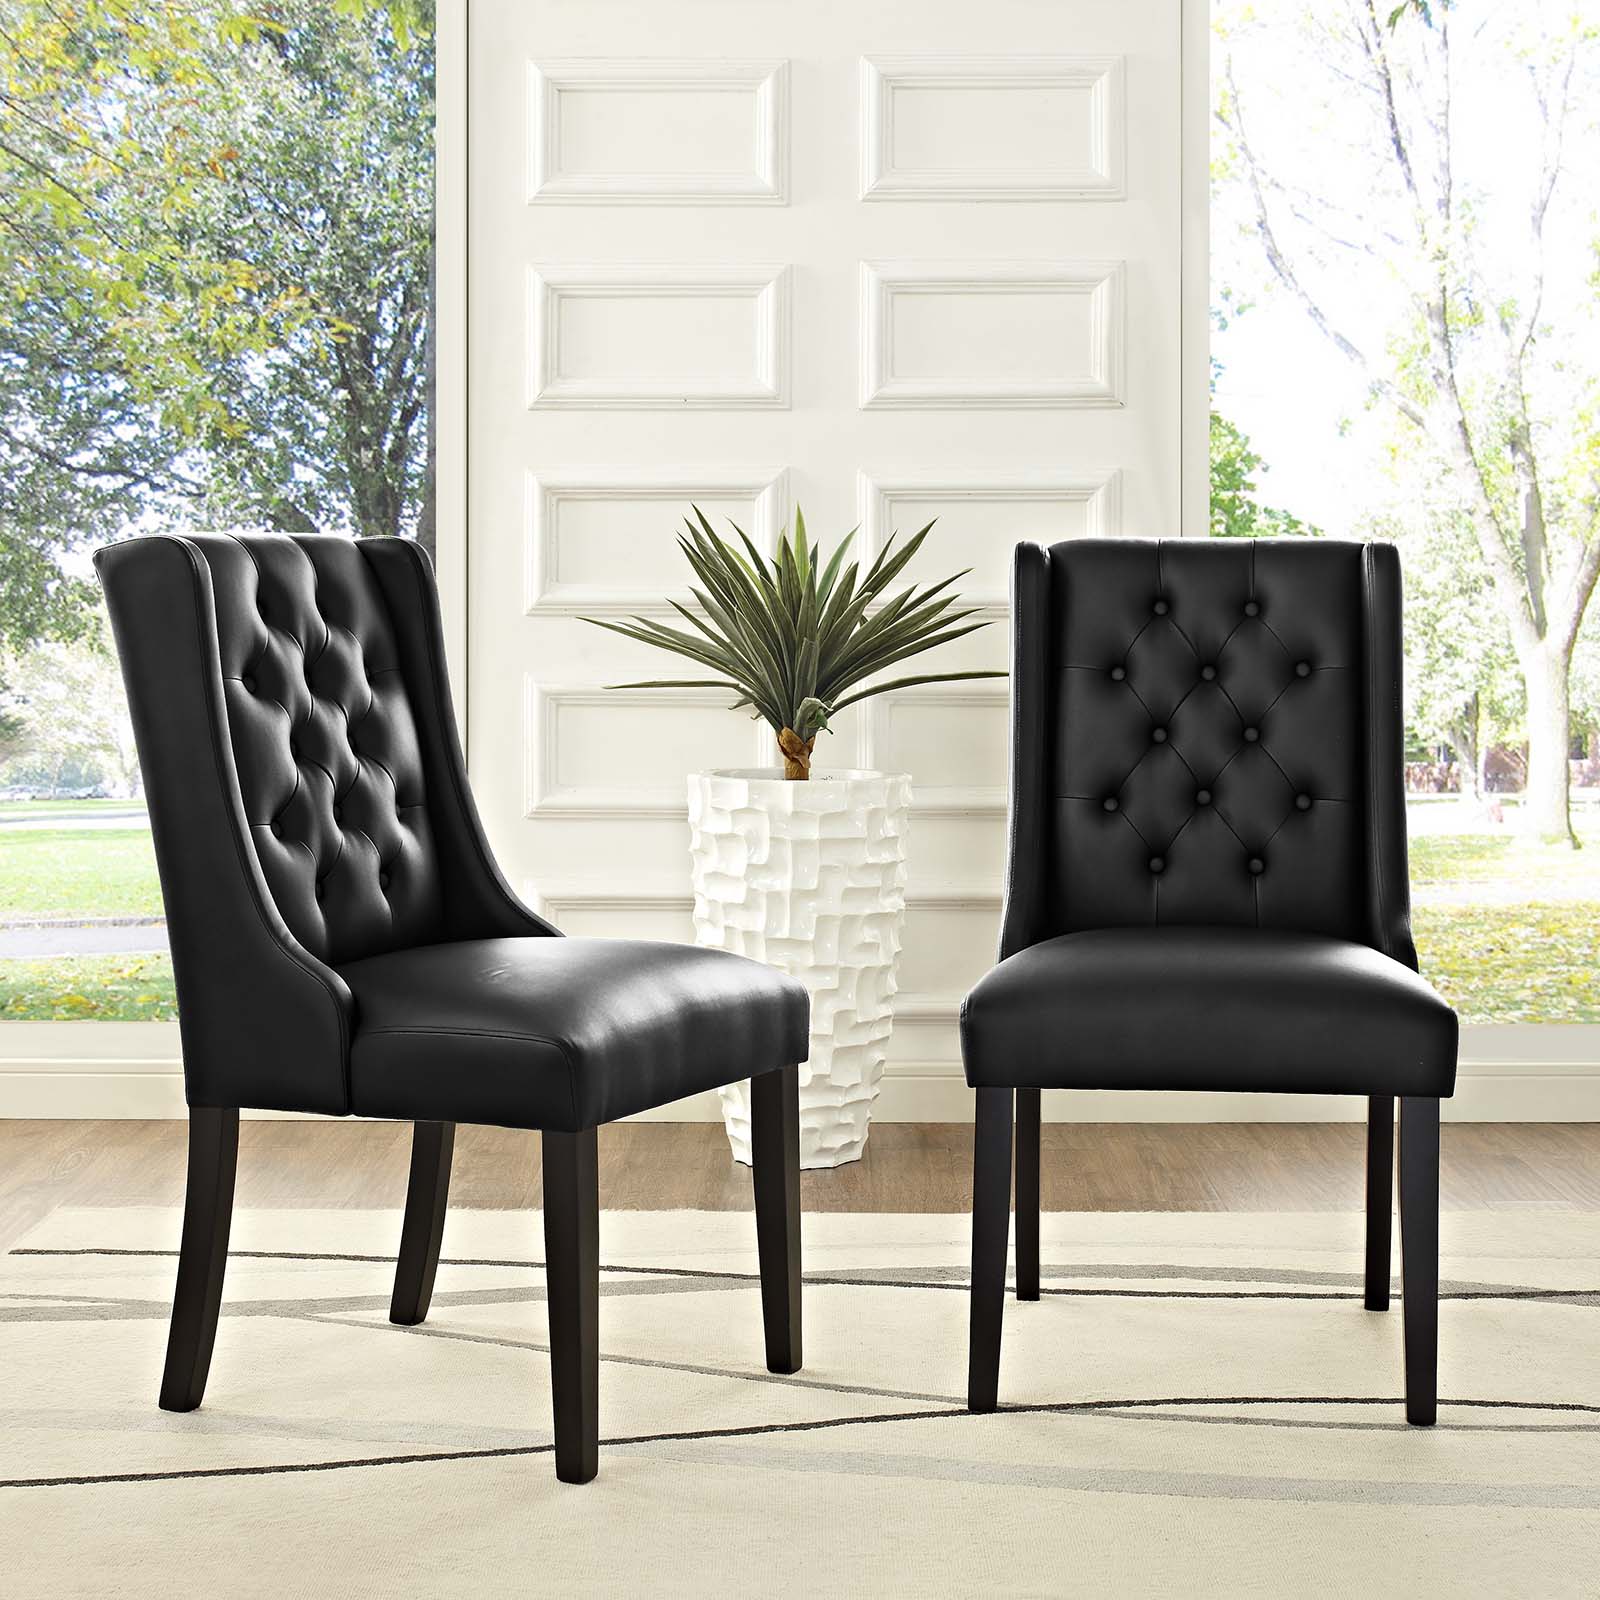 Modway Dining Chairs - Baronet Dining Chair Vinyl ( Set of 2 ) Black